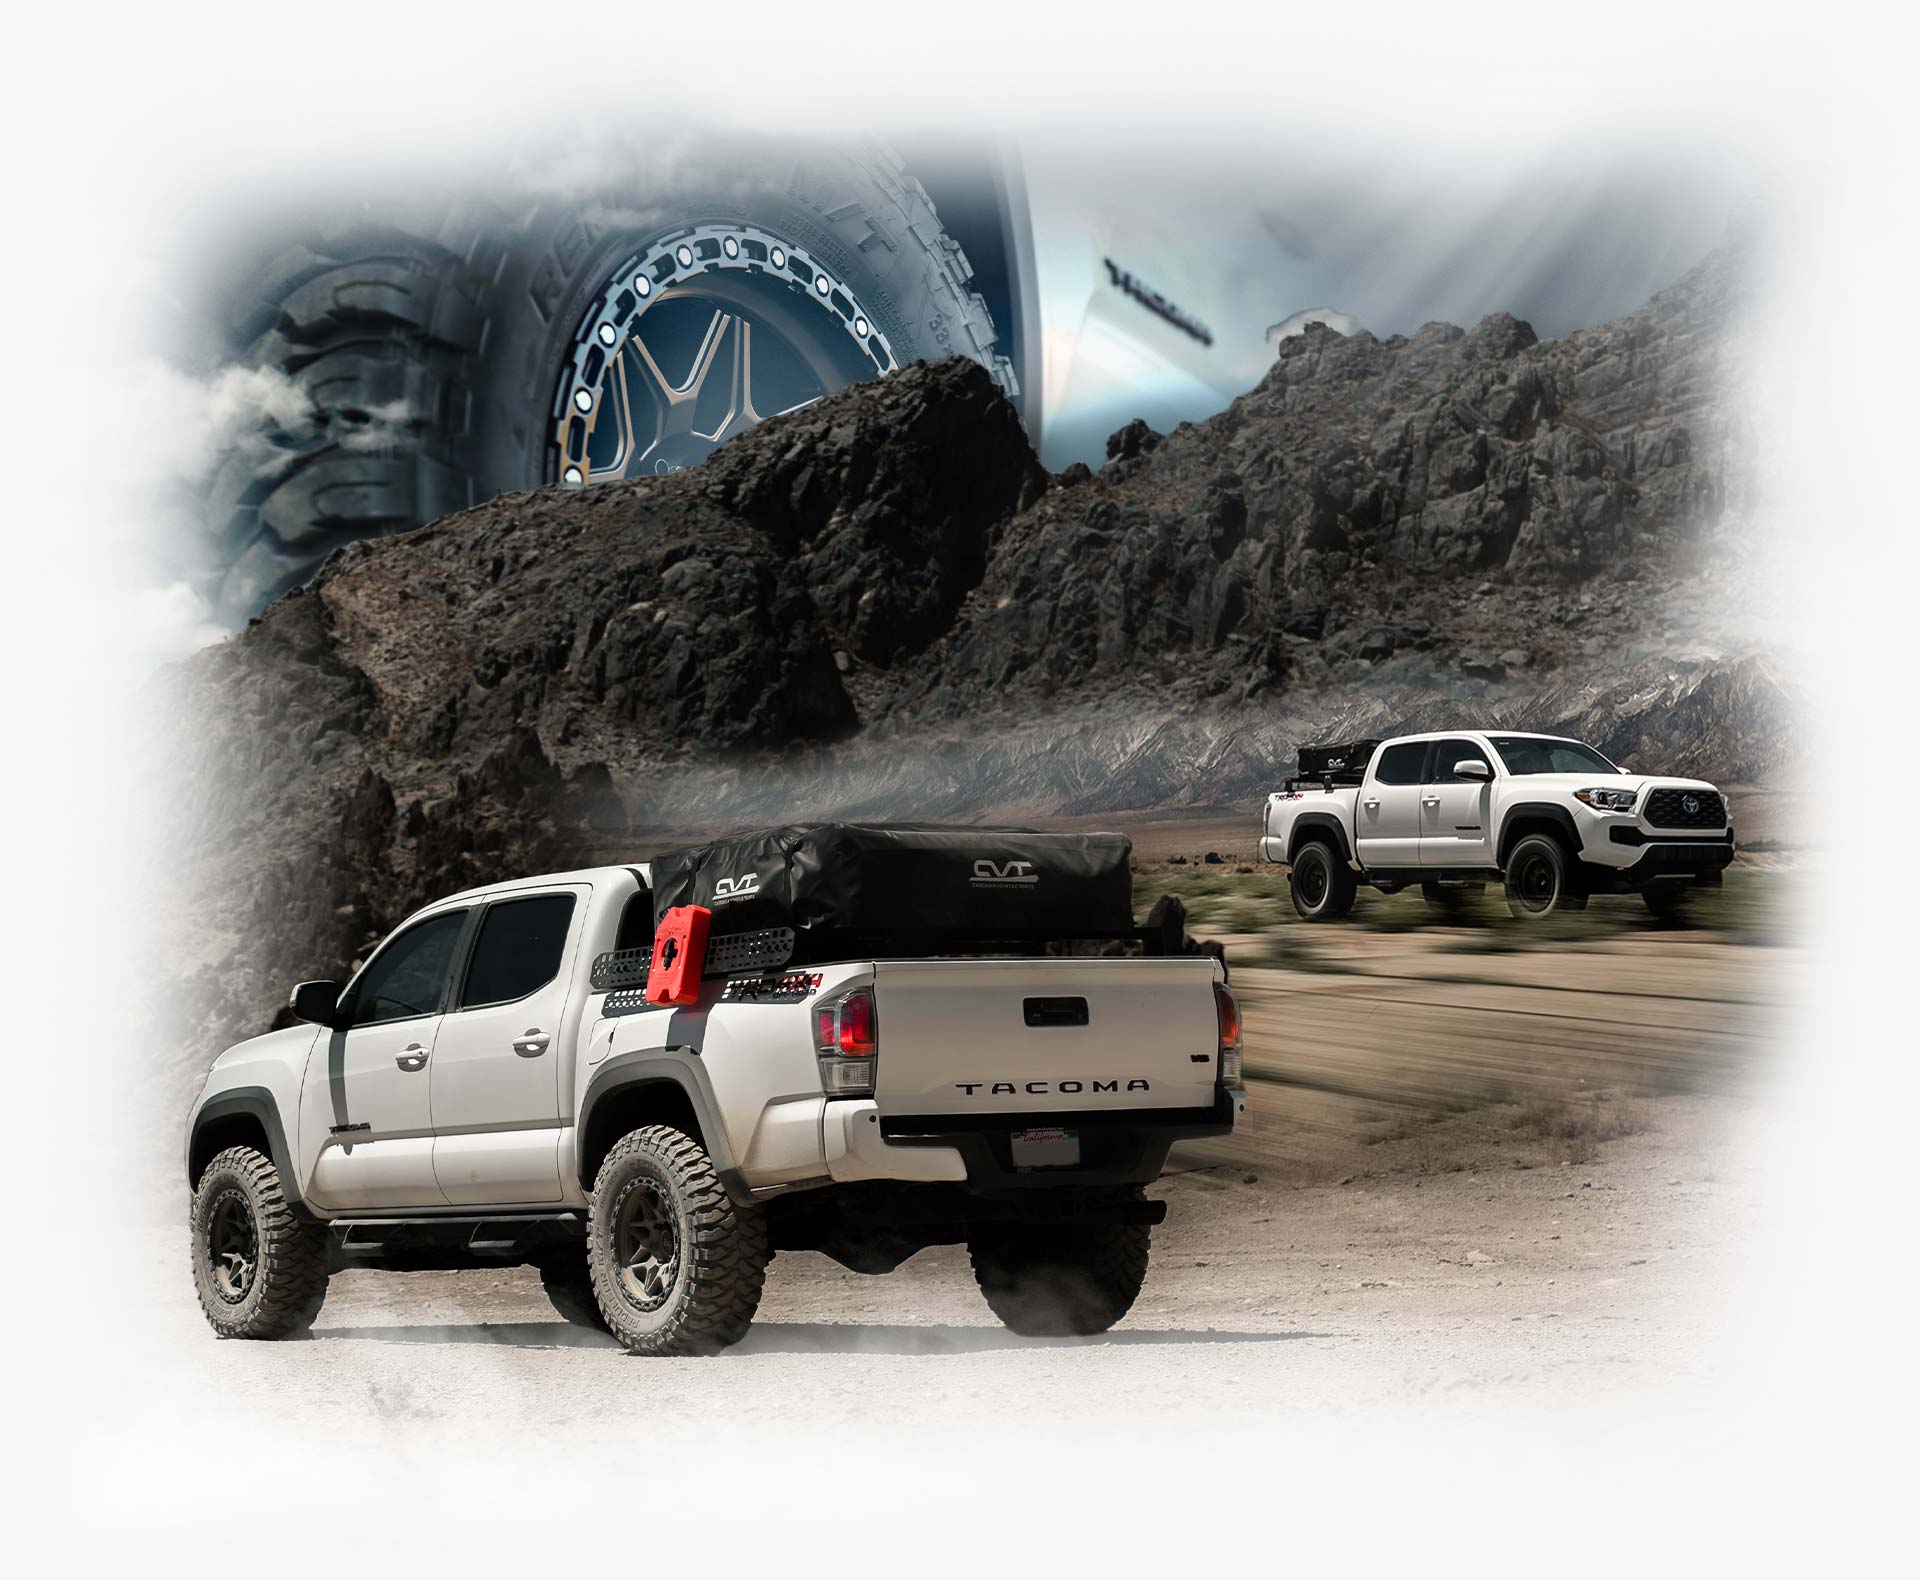 A graphic design image of RBP tires and a Toyota Tacoma